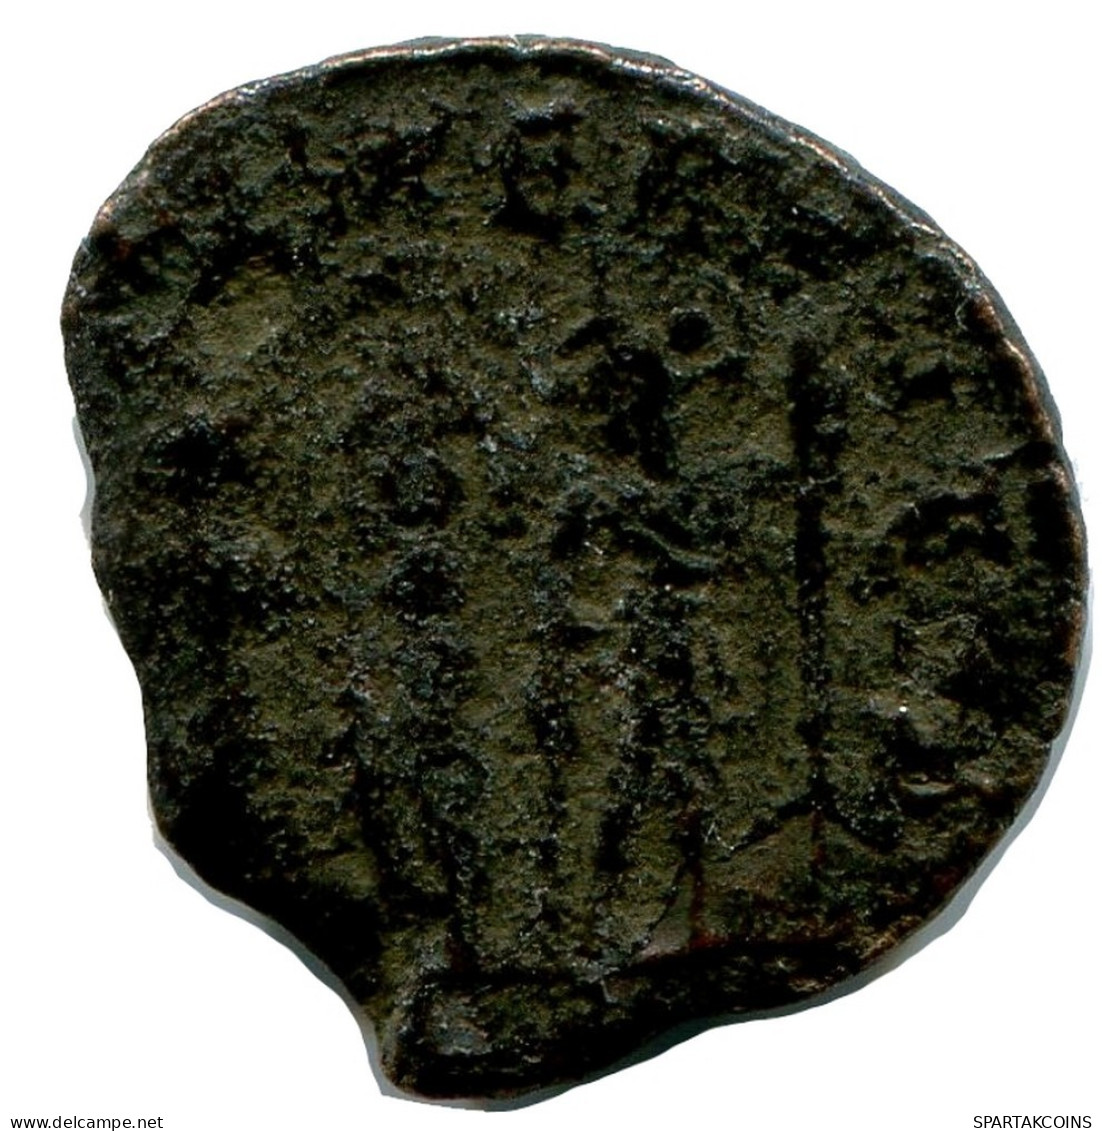 CONSTANTIUS II MINT UNCERTAIN FROM THE ROYAL ONTARIO MUSEUM #ANC10124.14.D.A - The Christian Empire (307 AD Tot 363 AD)